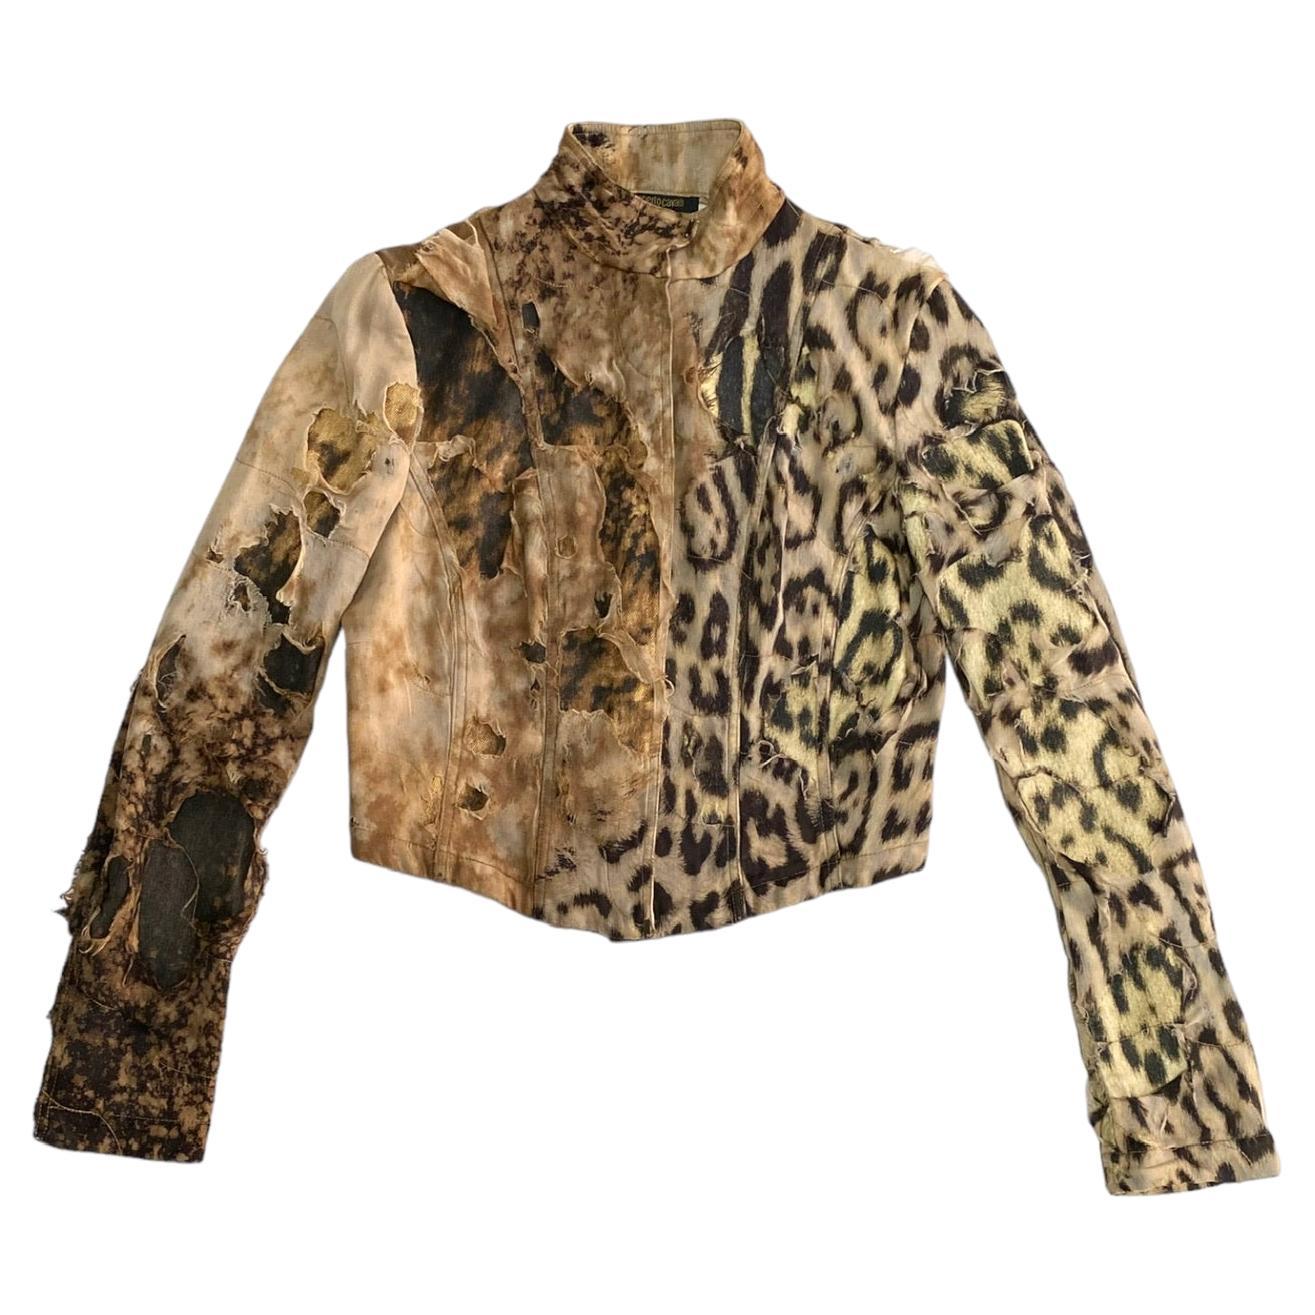 Roberto Cavalli cheetah print jacket in cotton twill lined with ripped silk. For Sale